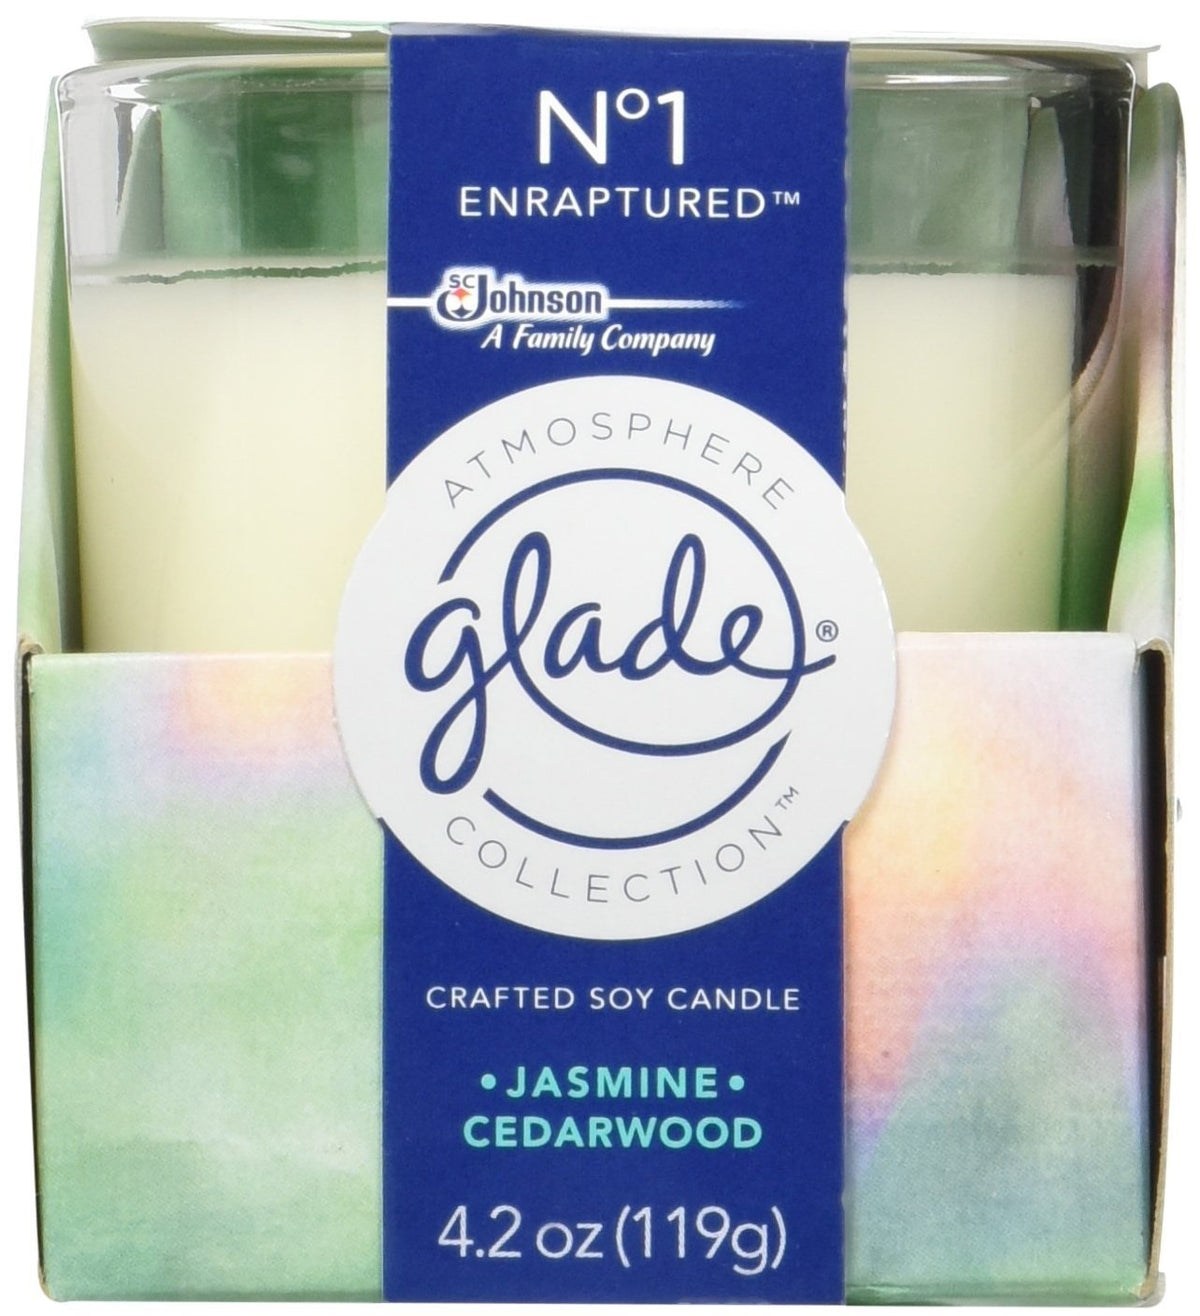 Glade 77226 Atmosphere Collection Crafted Soy Candle Air Freshener, 4.2 Oz